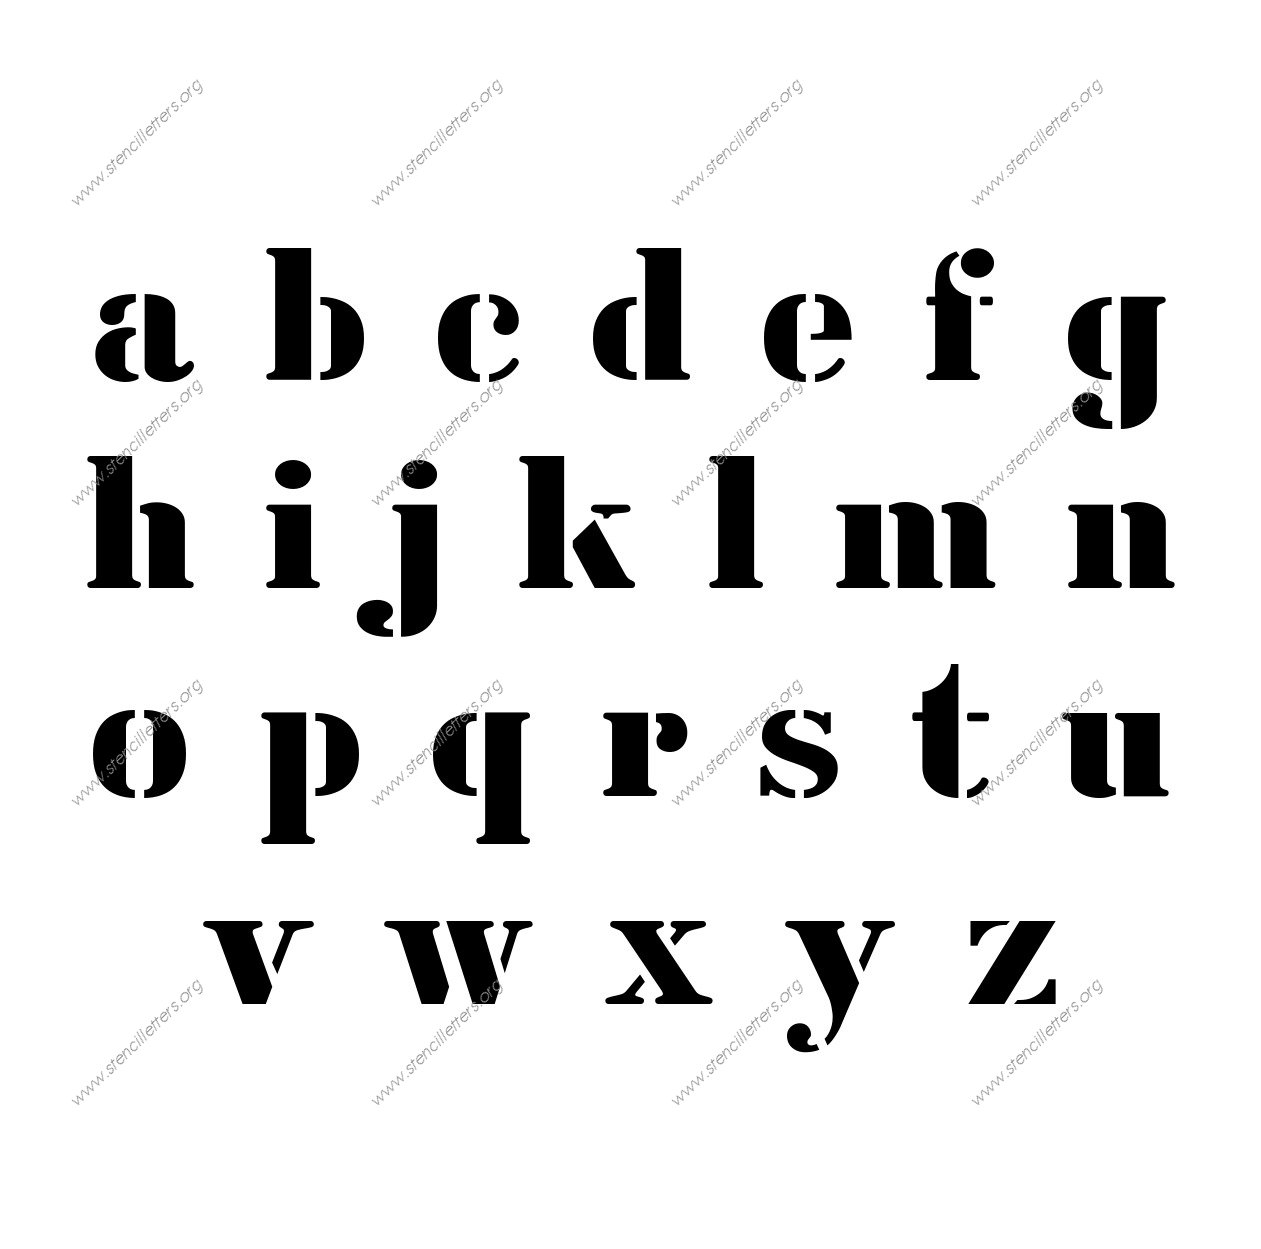 Decorative Army A to Z lowercase letter stencils